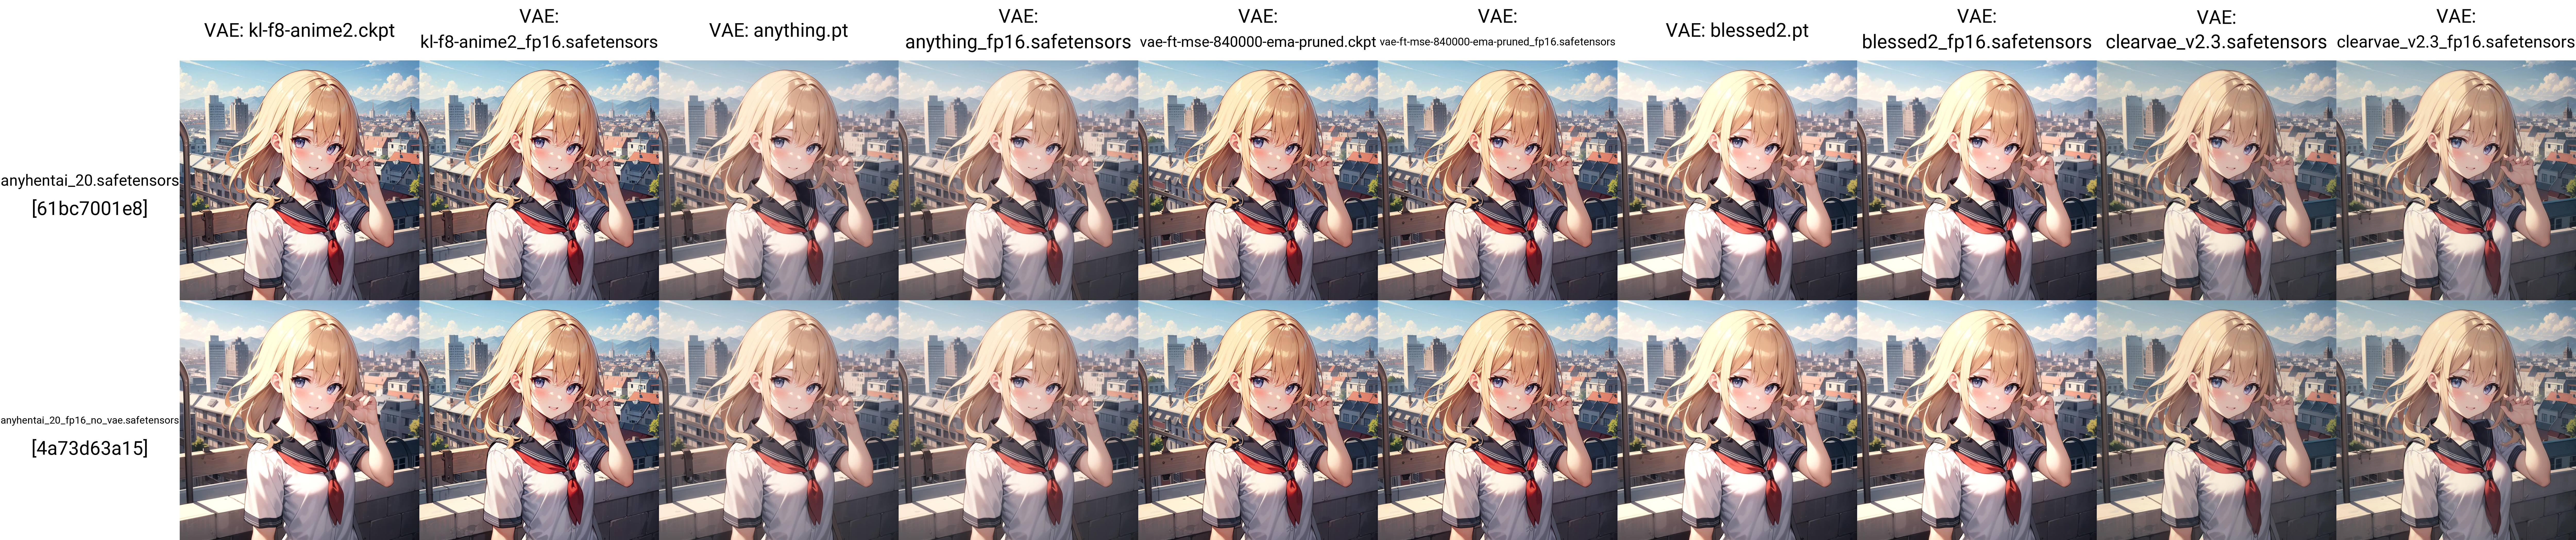 Anything / Kl-f8-anime2 / Vae-ft-mse-840000-ema-pruned / Blessed / ClearVAE (fp16/cleaned) image by fp16_guy